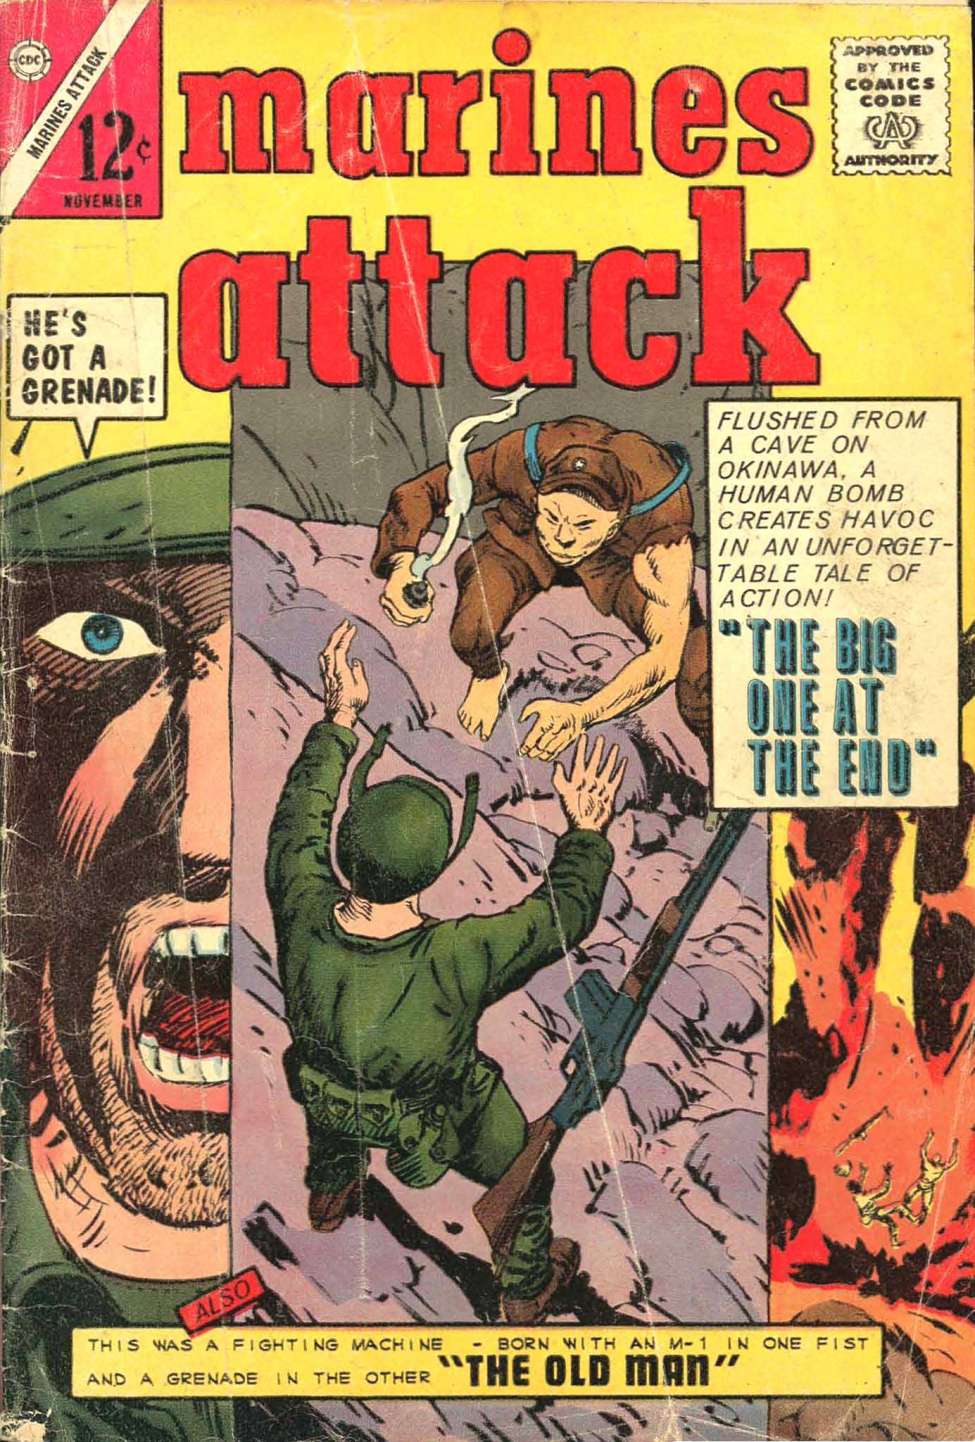 Comic Book Cover For Marines Attack 2